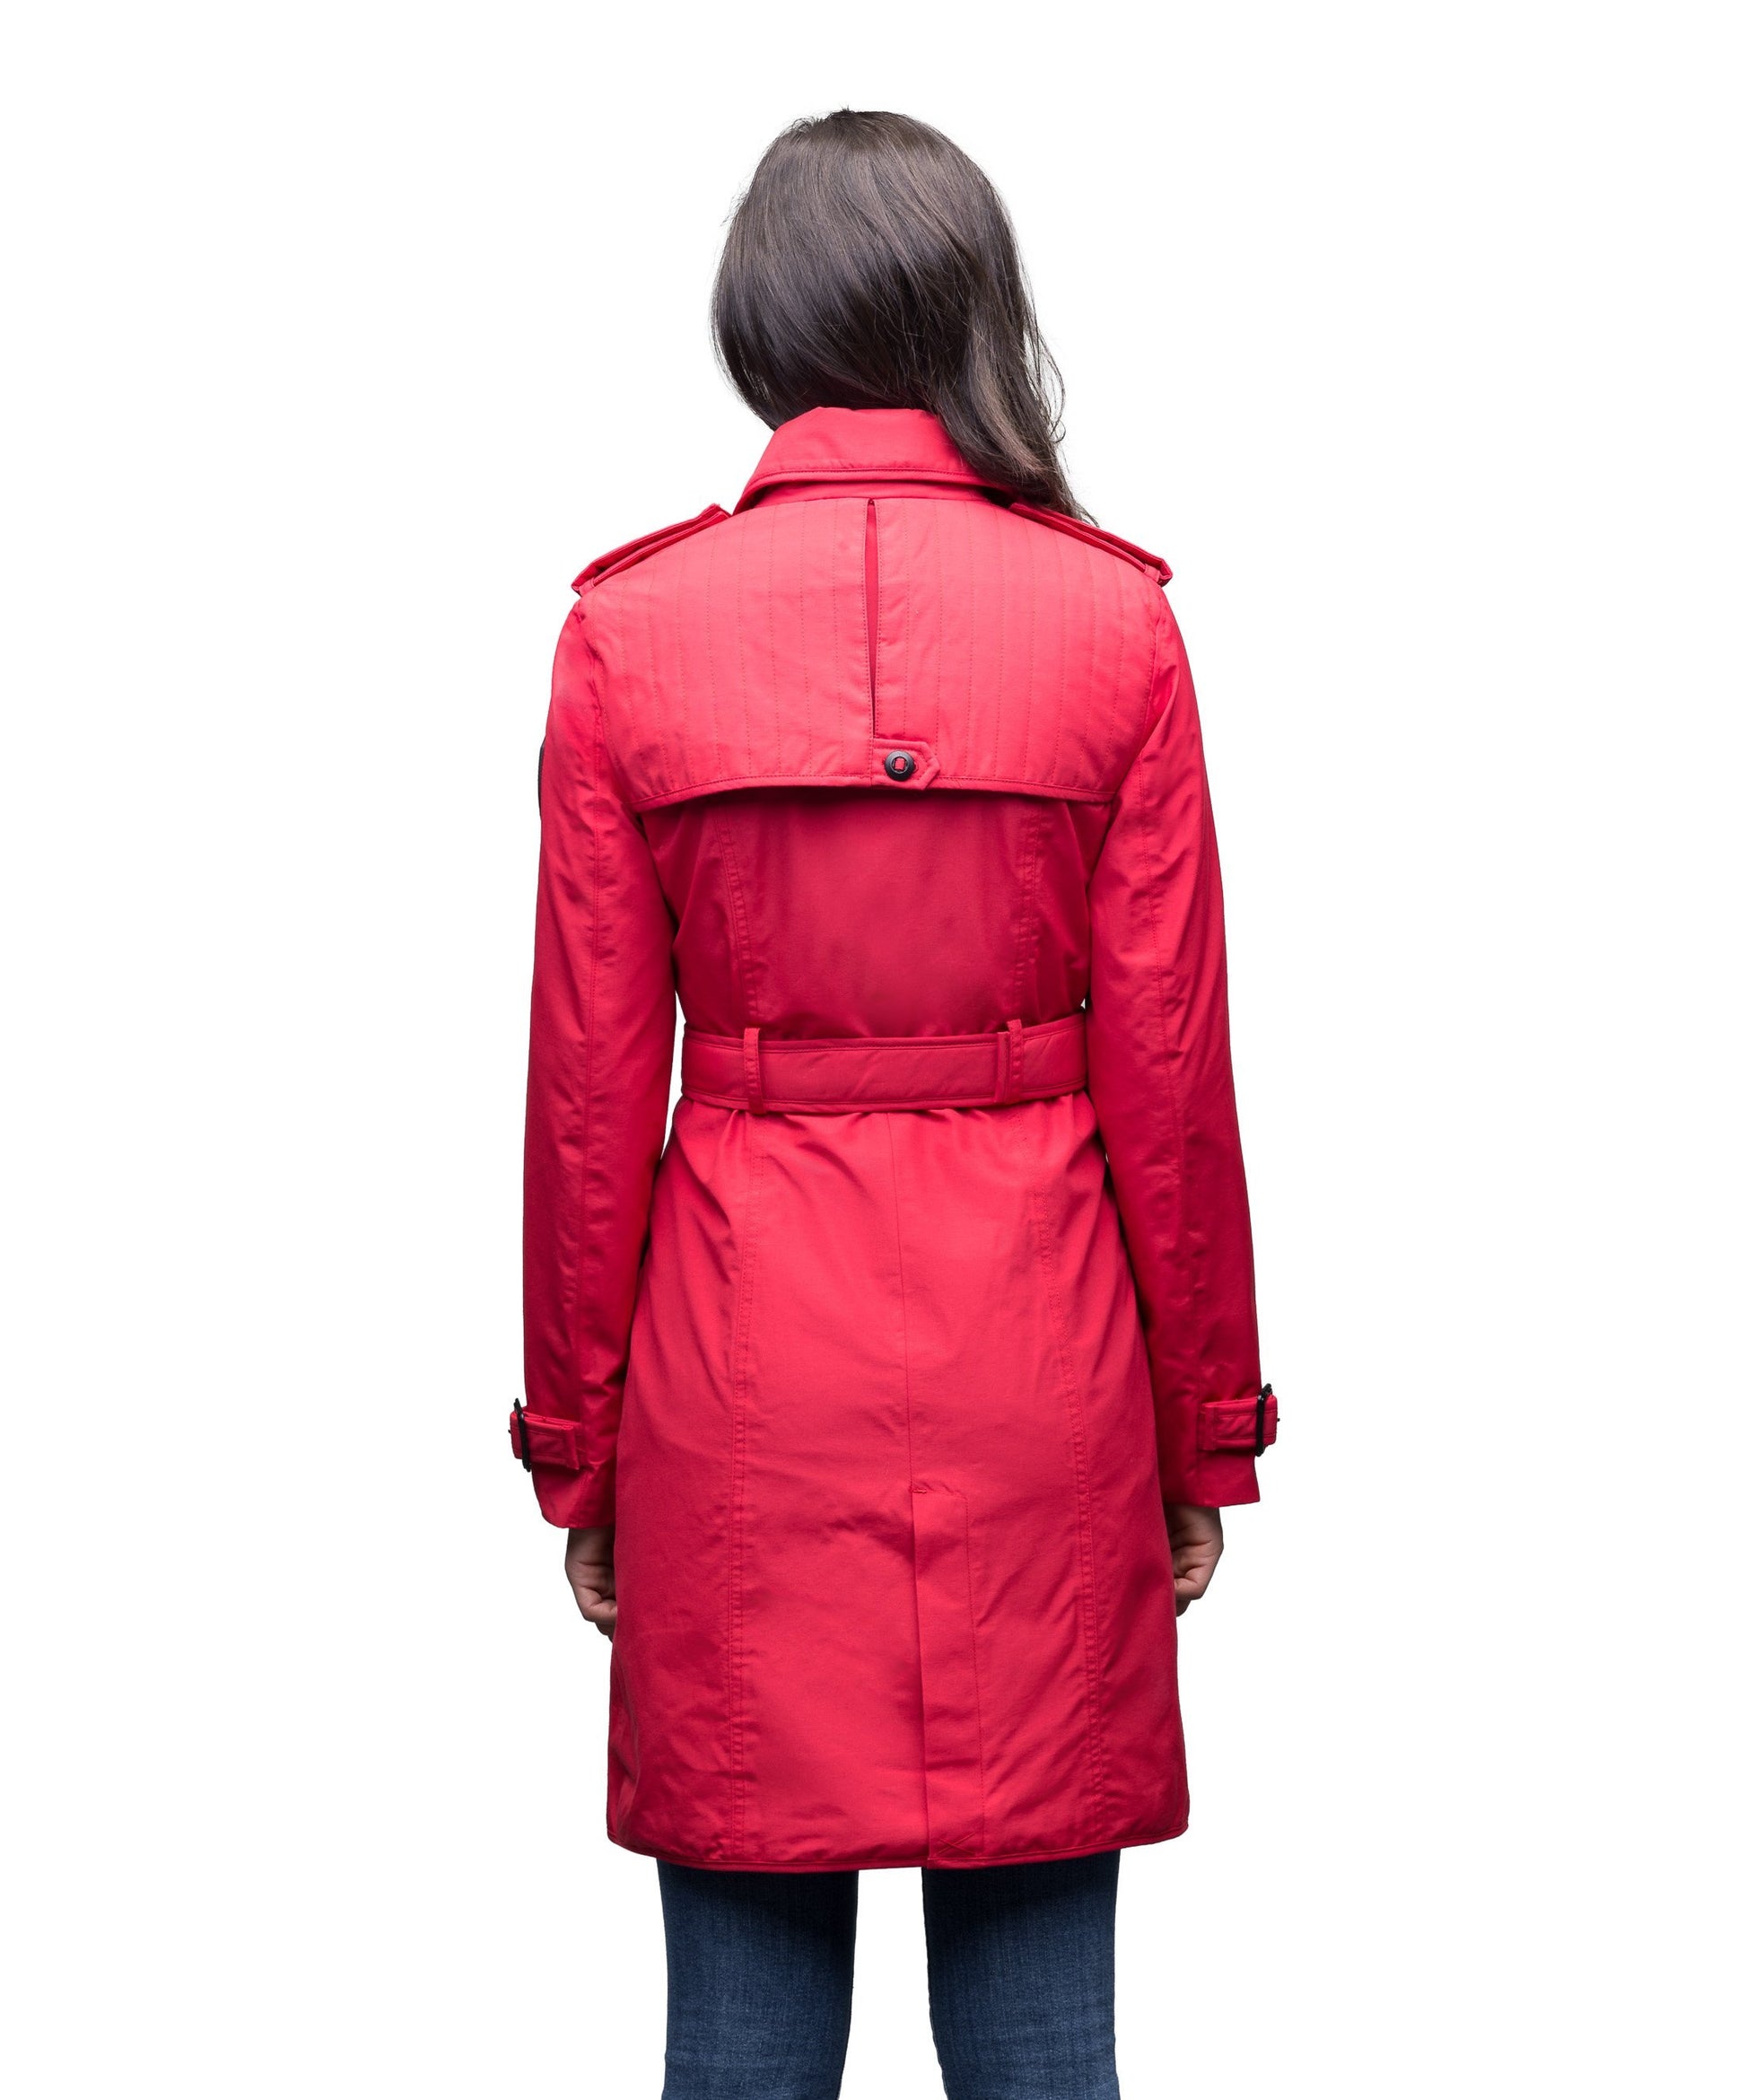 Women's classic trench coat that falls just above the knee in Red